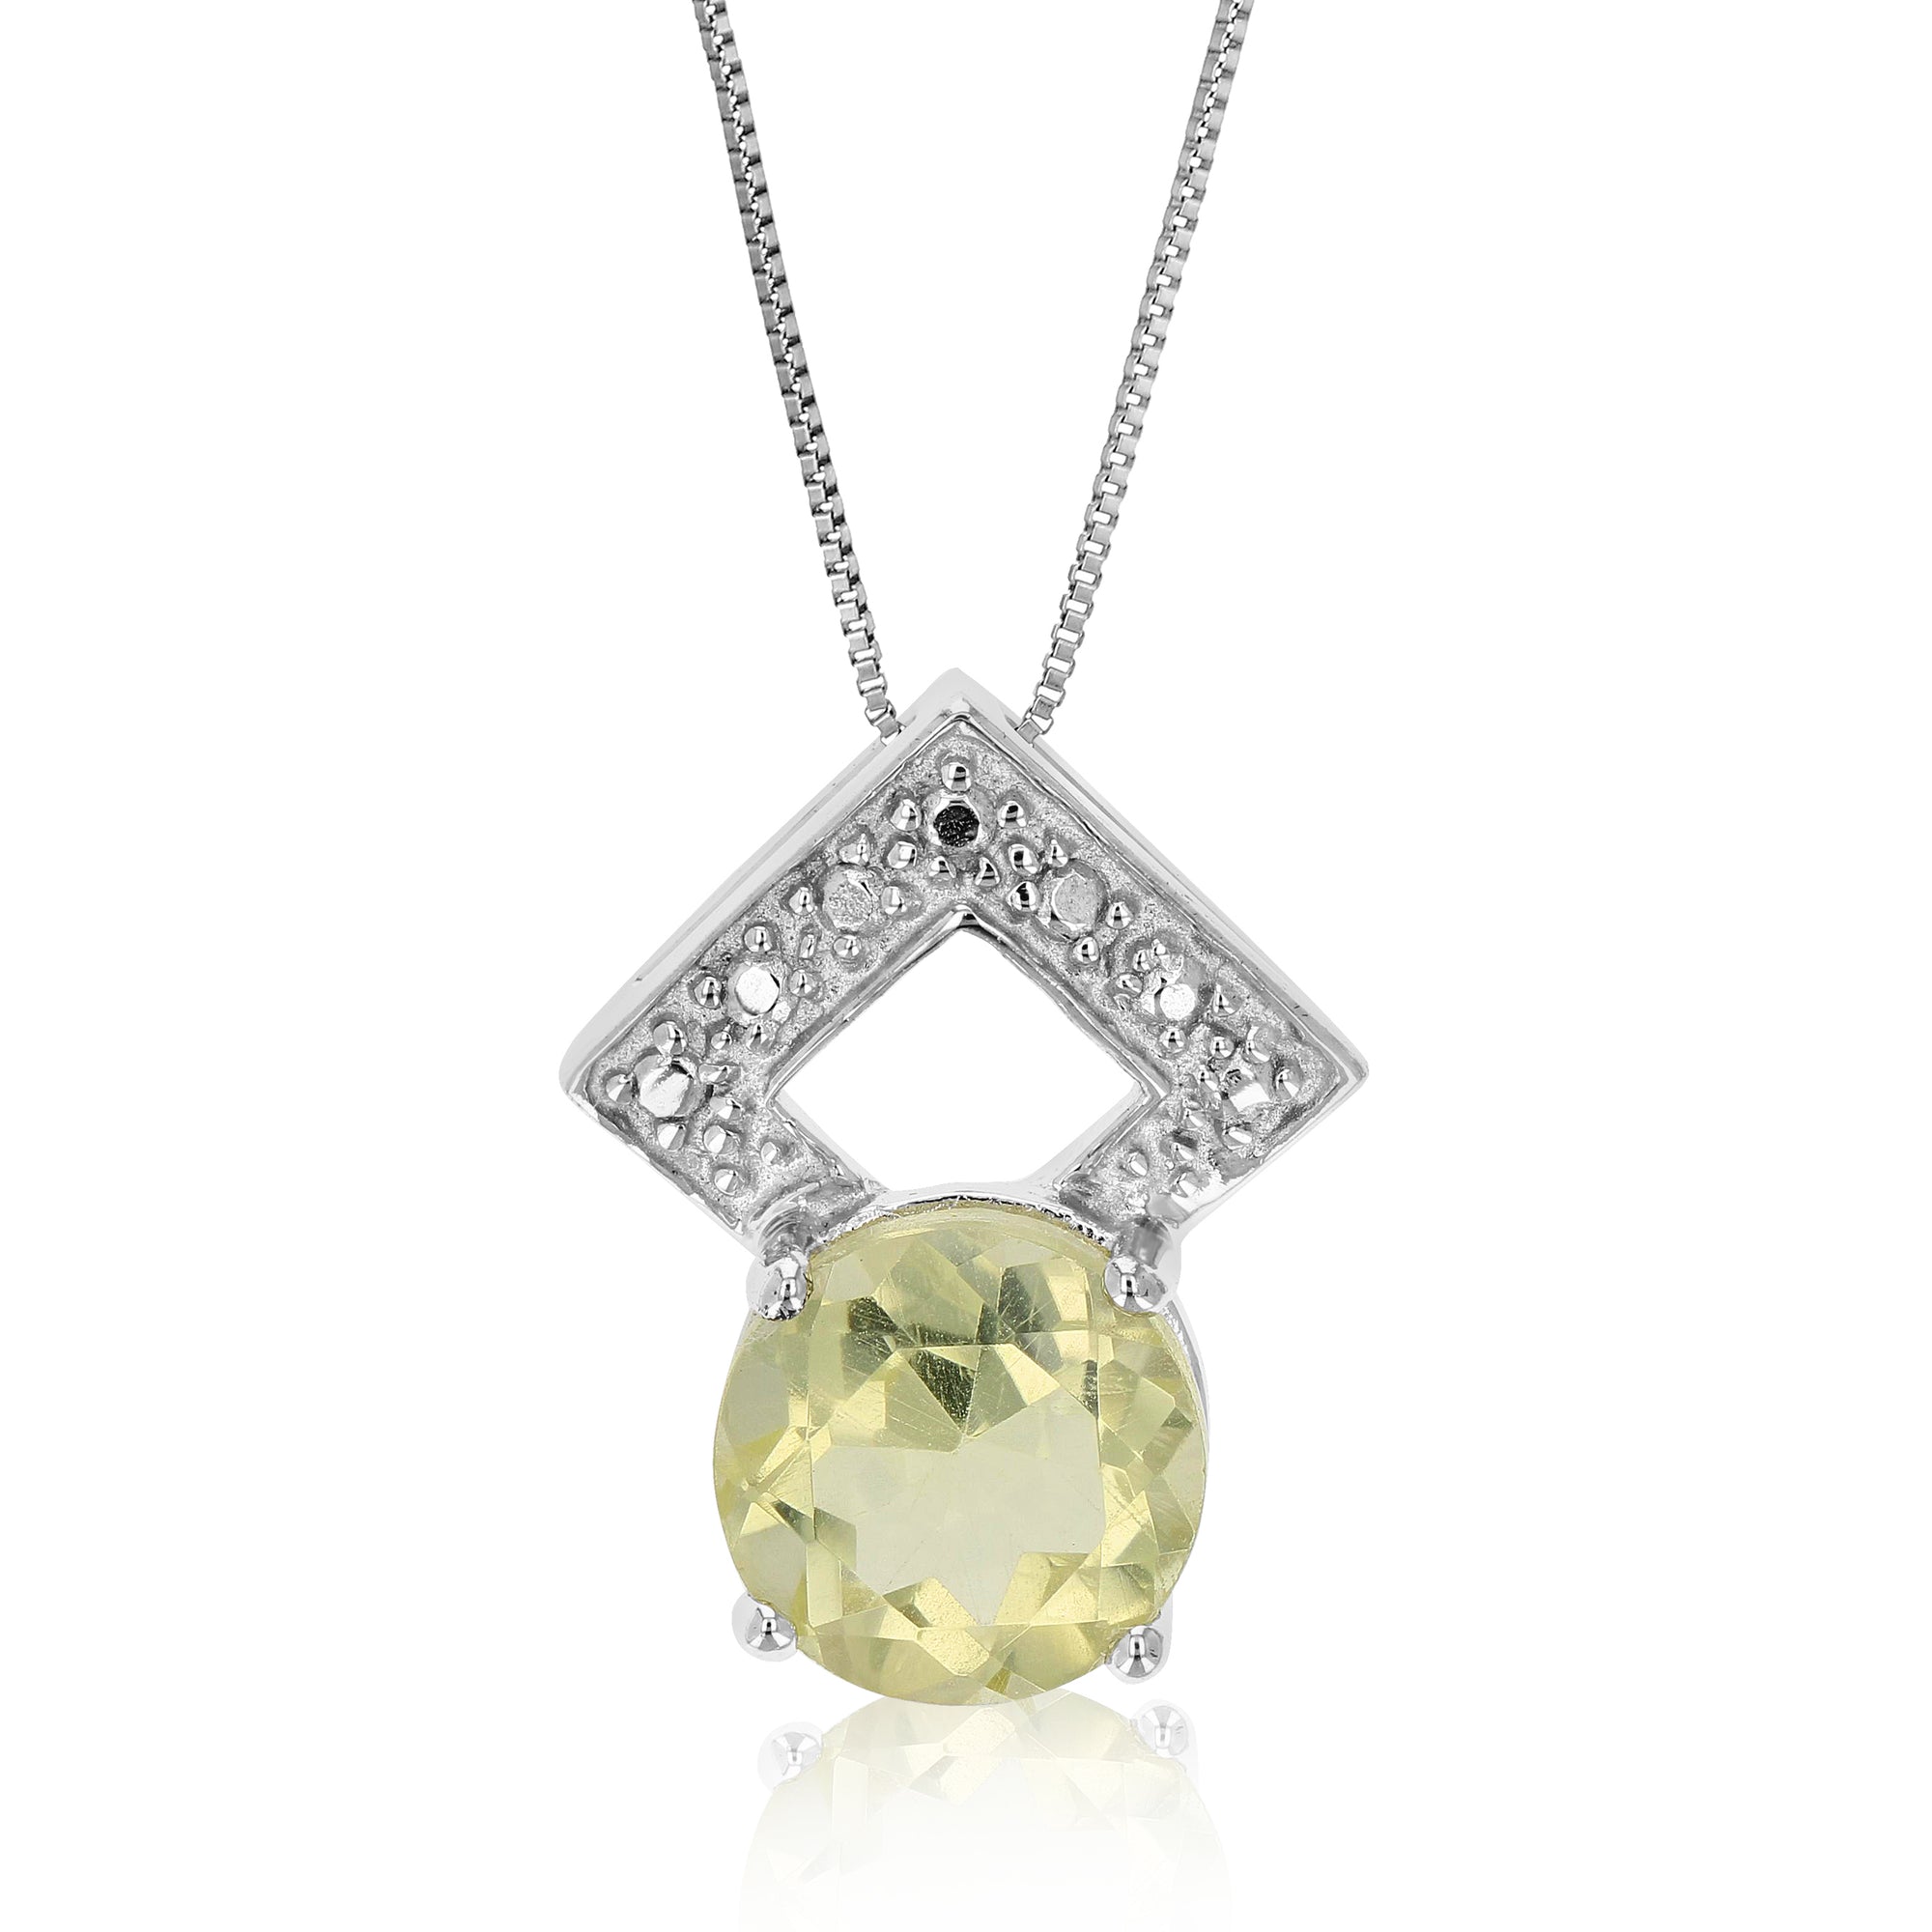 1.20 cttw Pendant Necklace, Lemon Quartz Pendant Necklace for Women in .925 Sterling Silver with Rhodium, 18 Inch Chain, Prong Setting